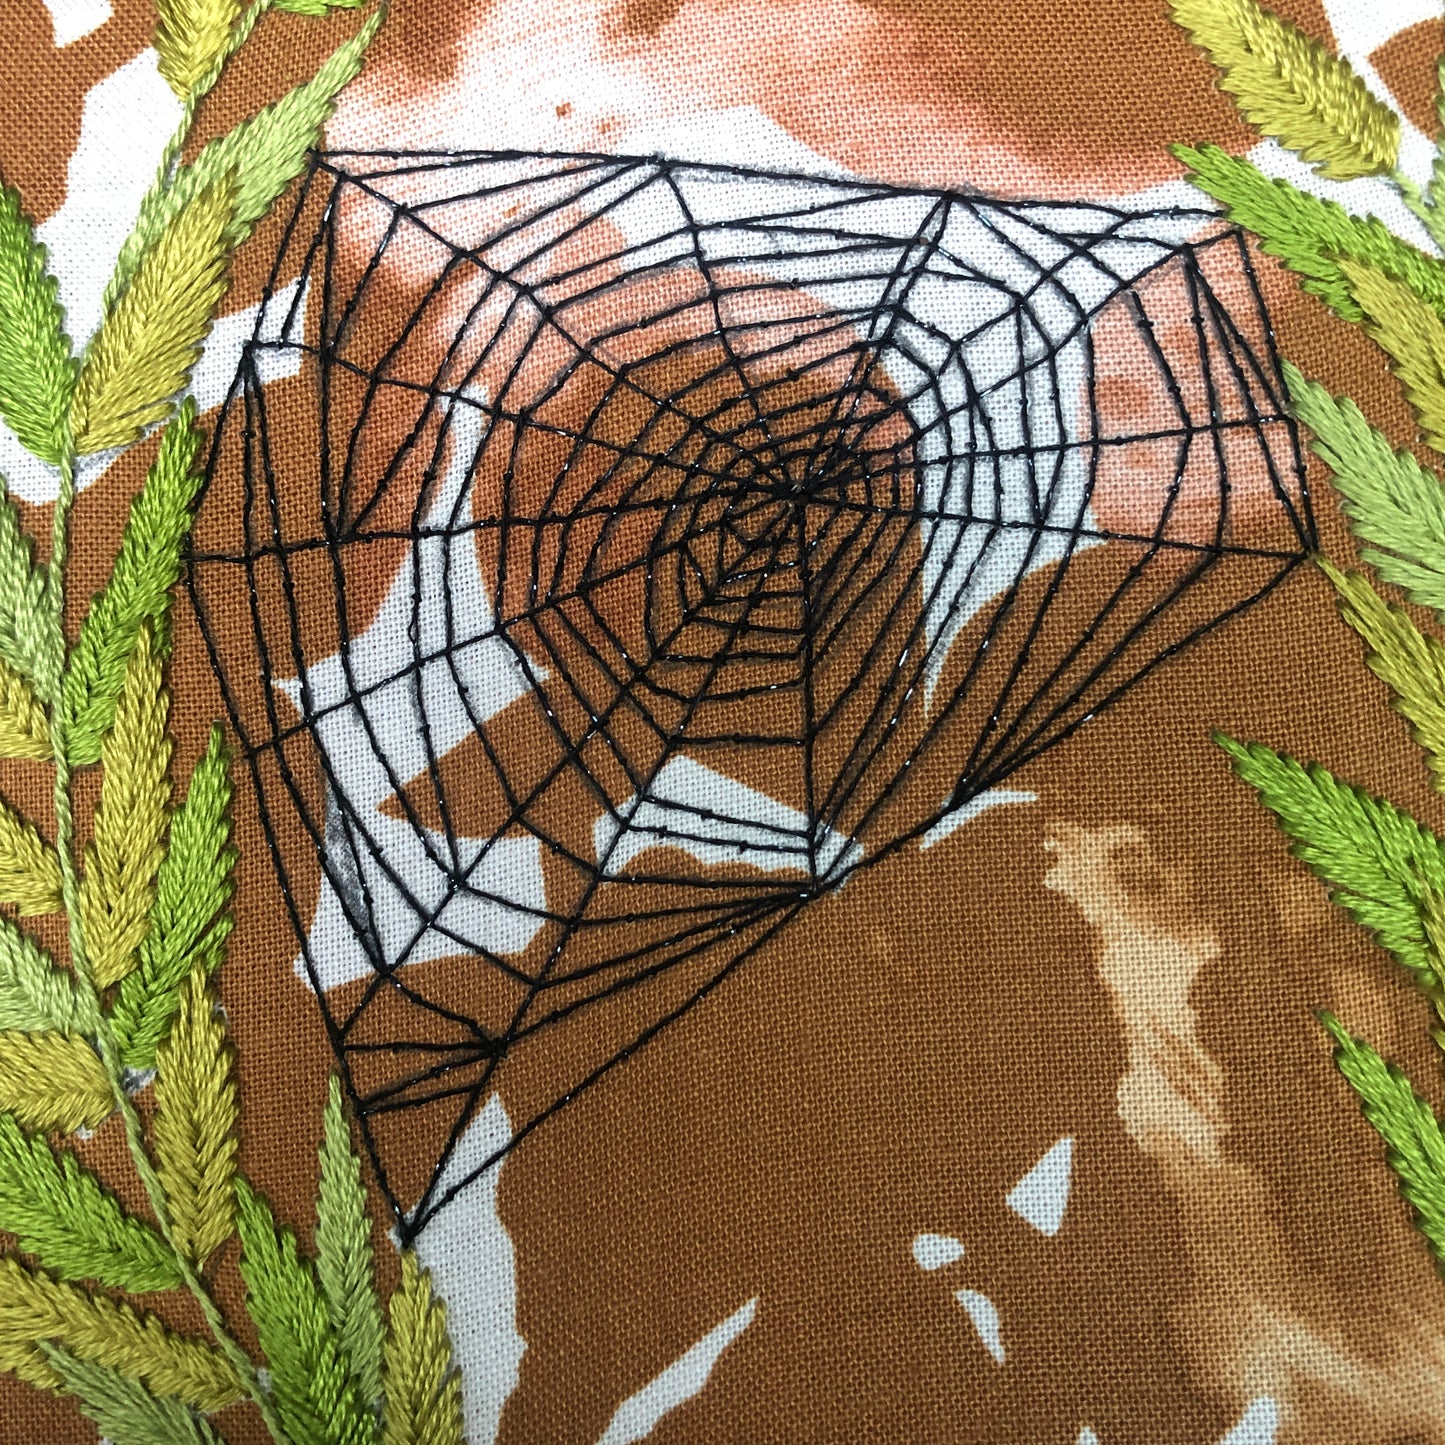 Spider Web and Ferns - Beginner Hand Embroidery PDF Pattern